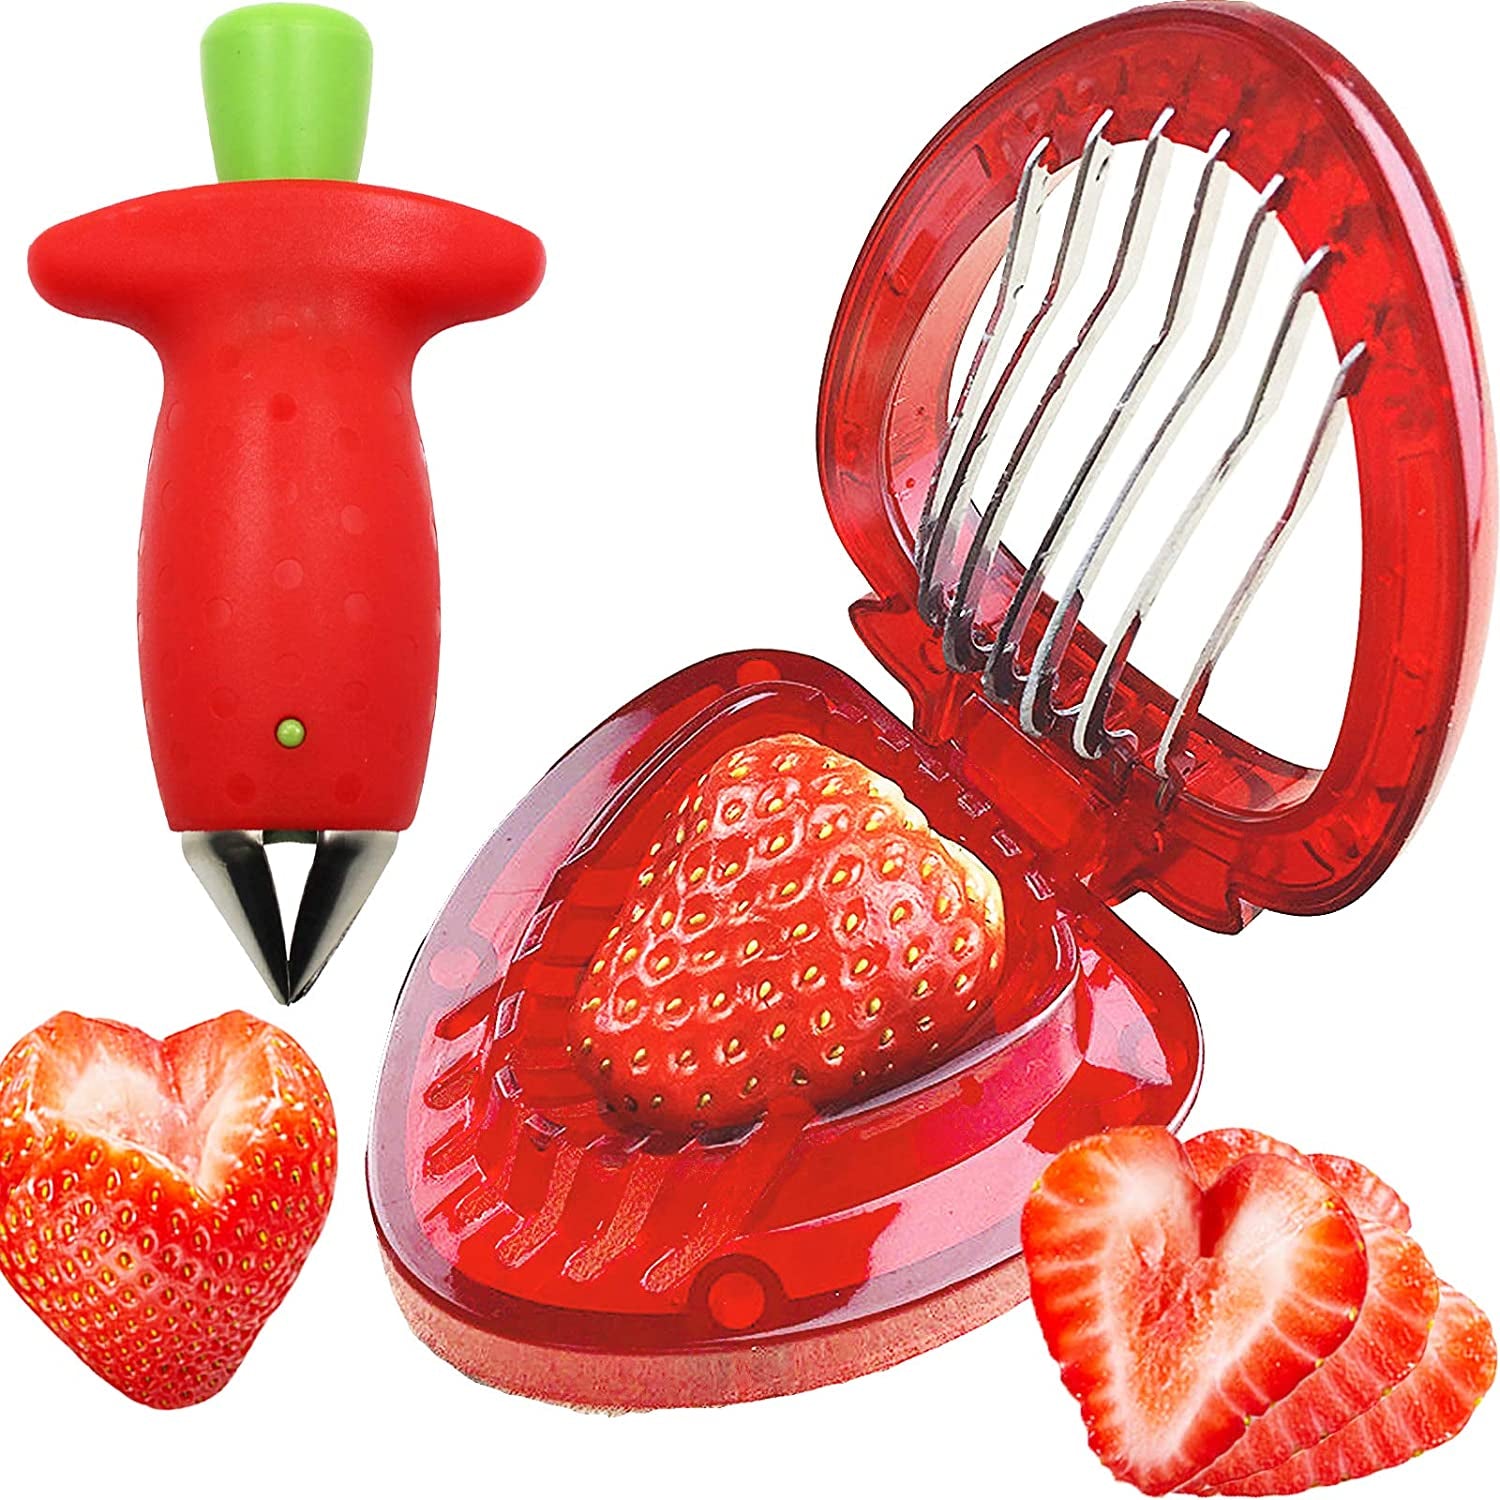 Strawberry Huller Stem Remover and Strawberry Slicer Set,Potatoes Pineapples Carrots Tomato Corer Slicer Cherry Pitter,Fruit Picker Stalks Tools,Stainless Steel Blade Kitchen Tools and Gadgets